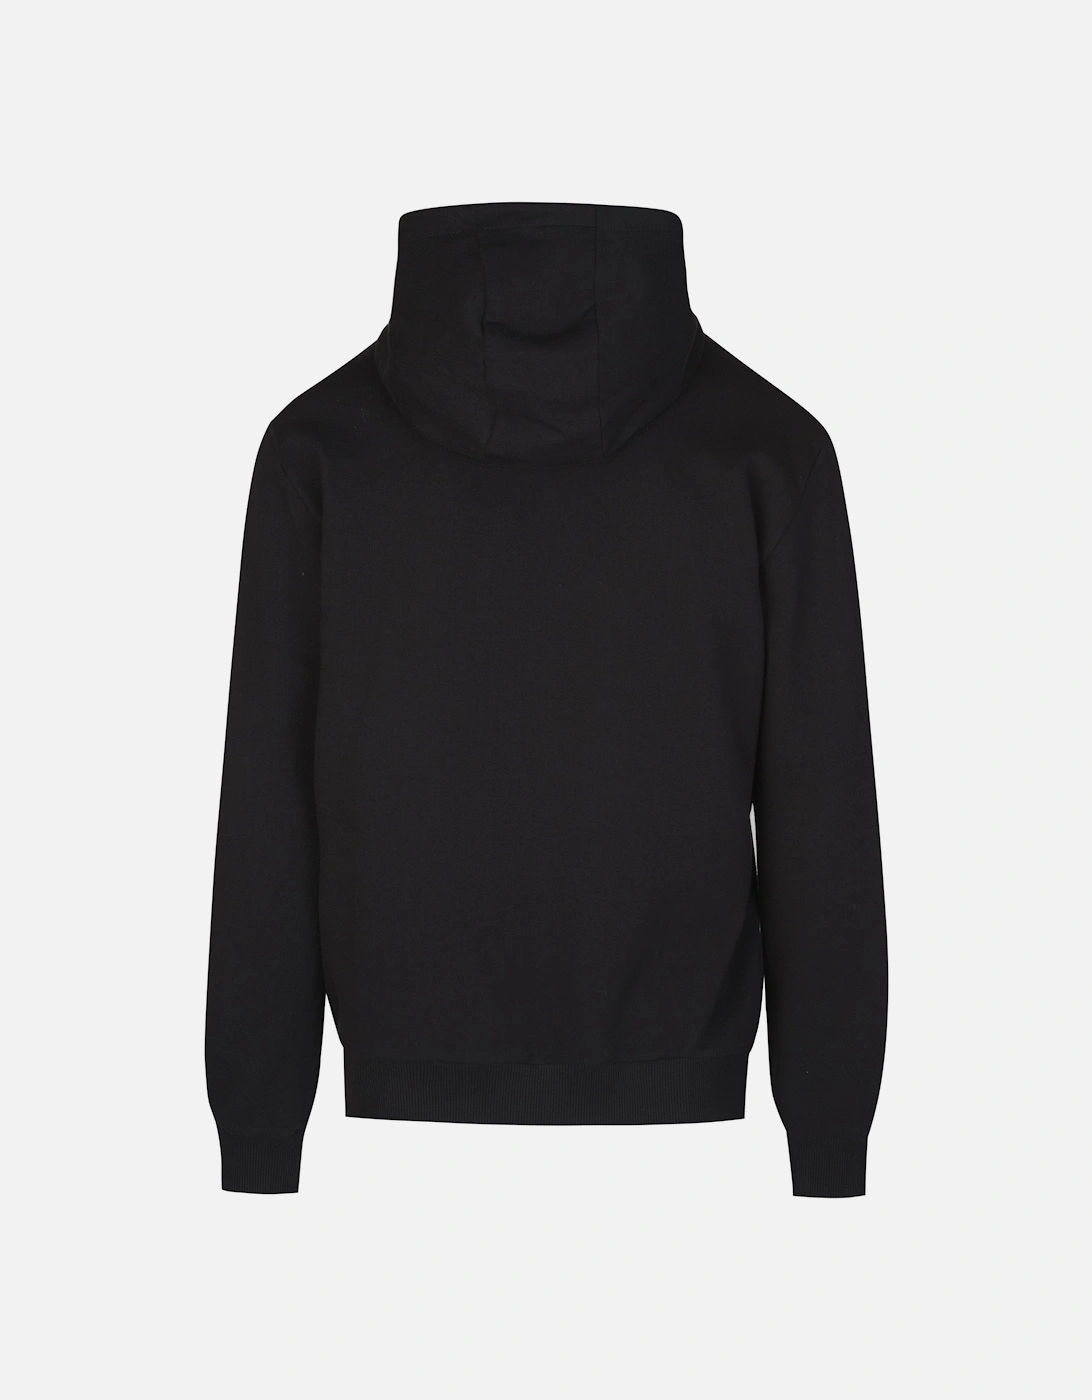 FF Linked Hooded Top